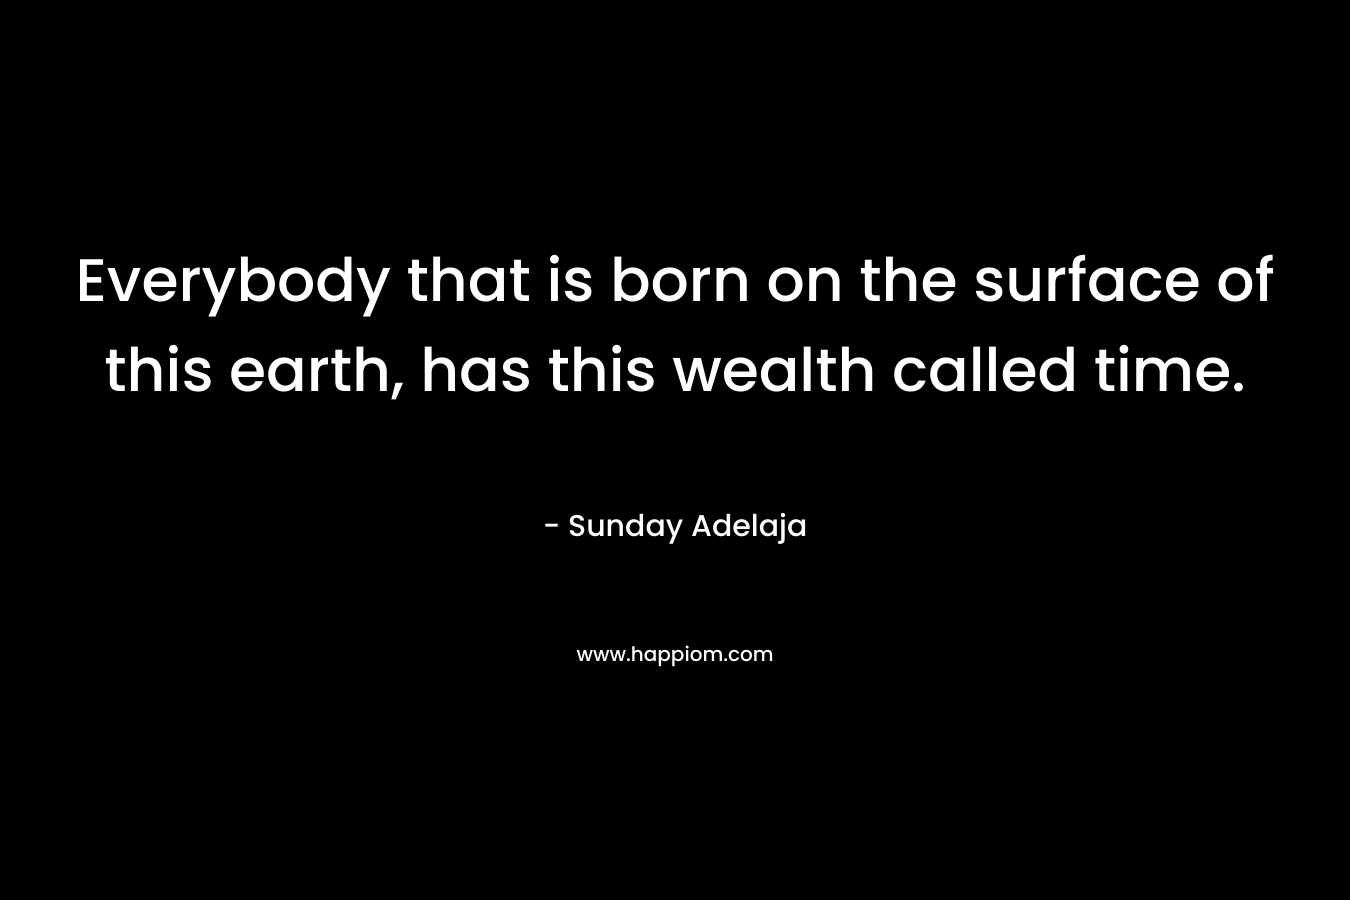 Everybody that is born on the surface of this earth, has this wealth called time.